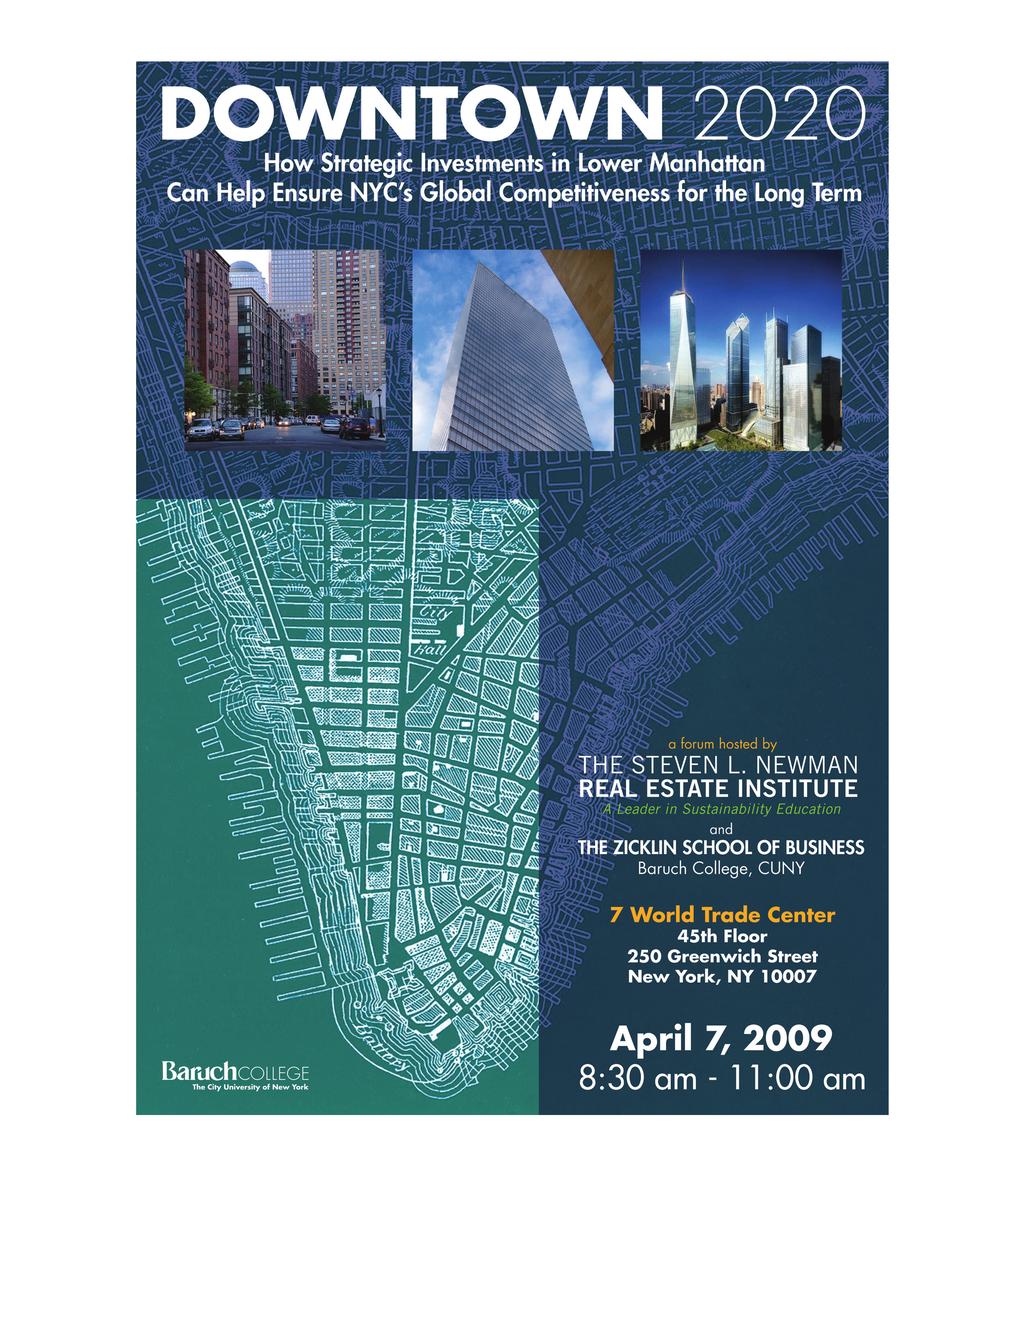 The Steven L. Newman Real Estate Institute Baruch College, CUNY Knowledge. Opportunity. Community.